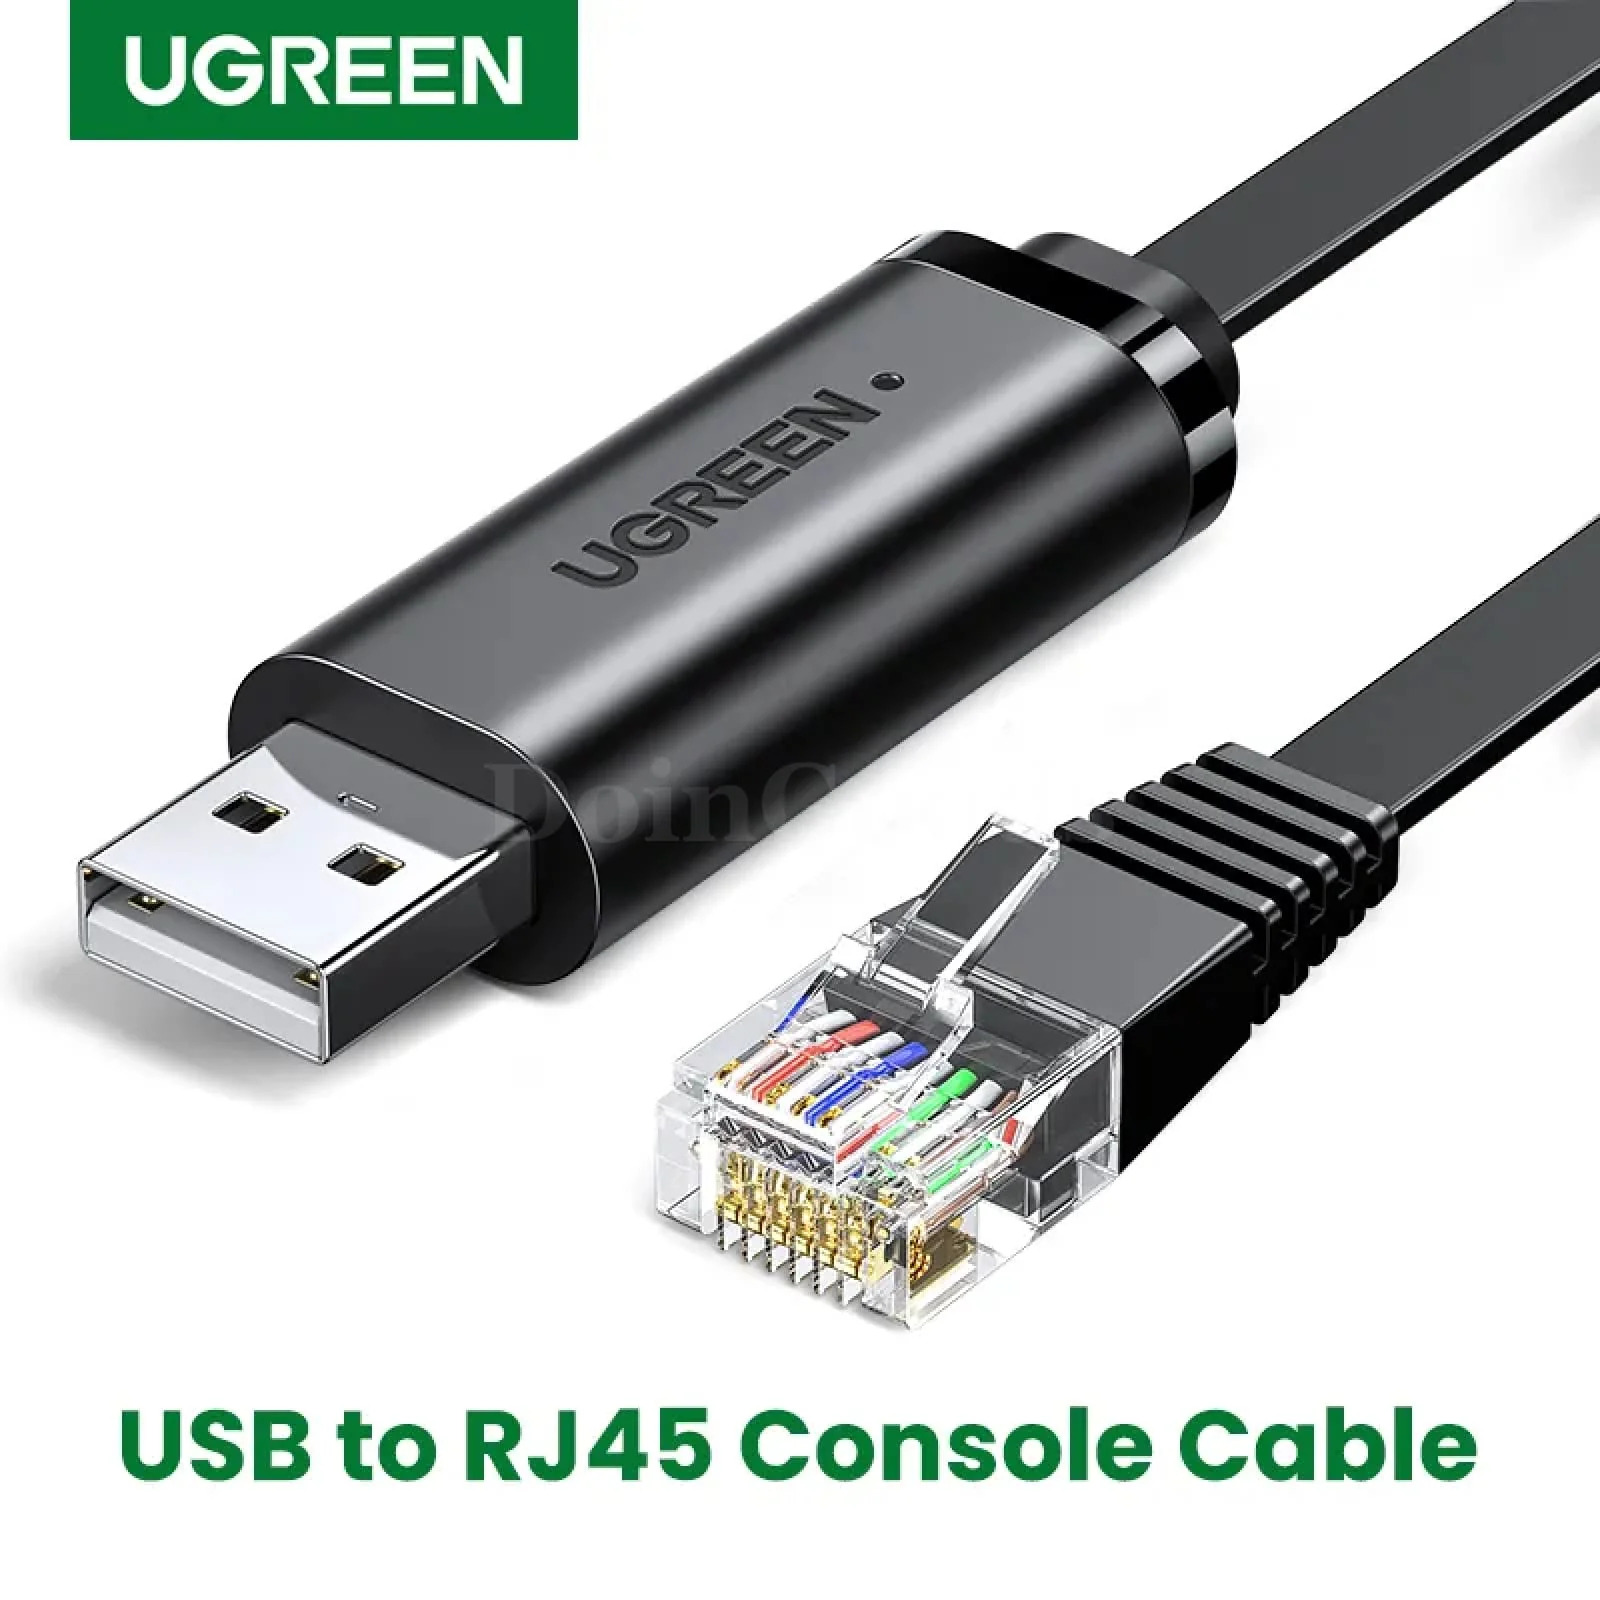 Ugreen USB RJ45 Console Cable RS232 Serial Adapter Cisco Router 8P8C Converter